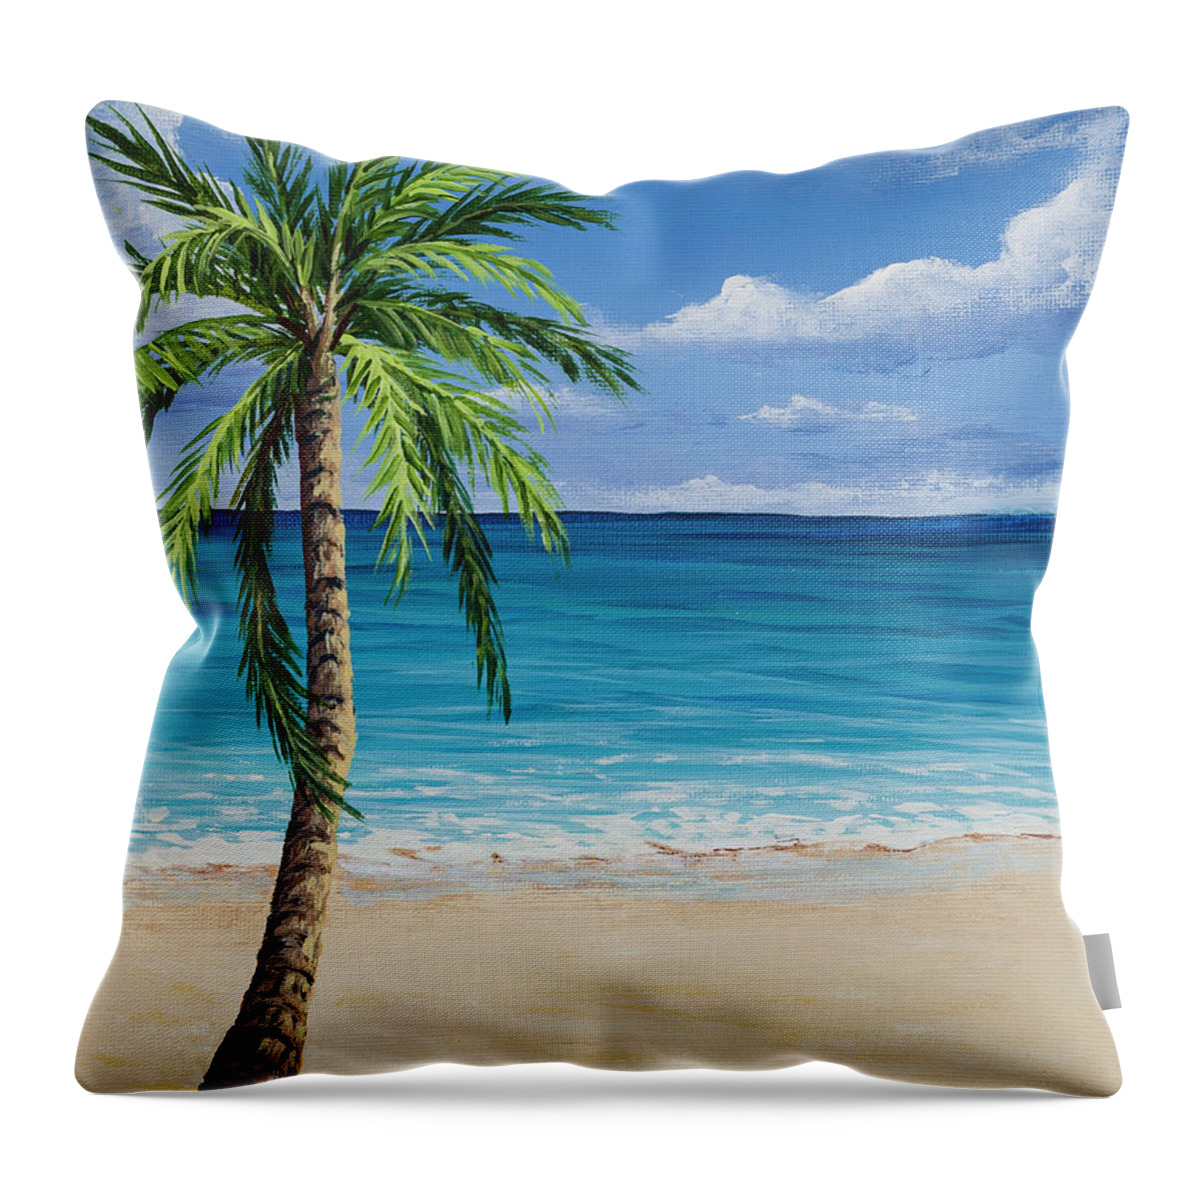 Seascape Throw Pillow featuring the painting Sunny Tropical Day by Darice Machel McGuire